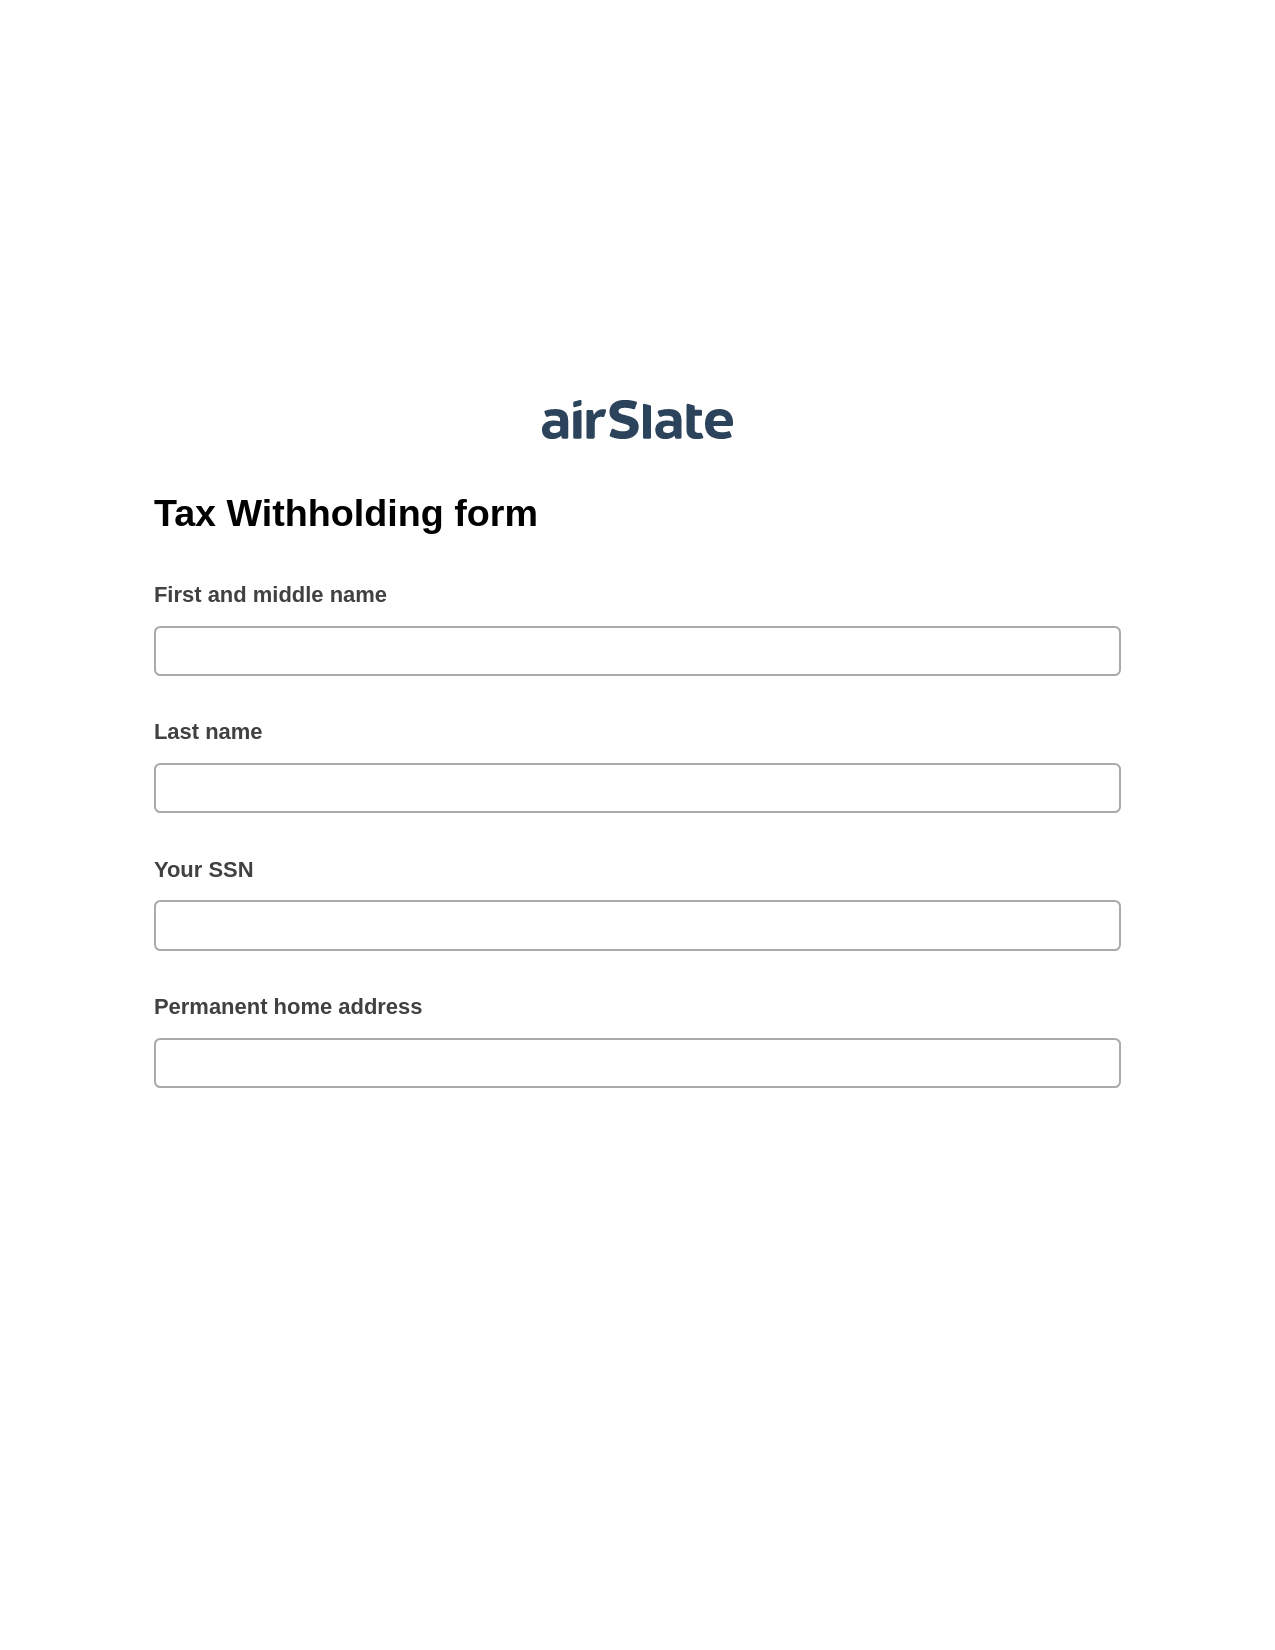 Multirole Tax Withholding form Pre-fill from Salesforce Records via SOQL Bot, Create NetSuite Records Bot, Export to Excel 365 Bot